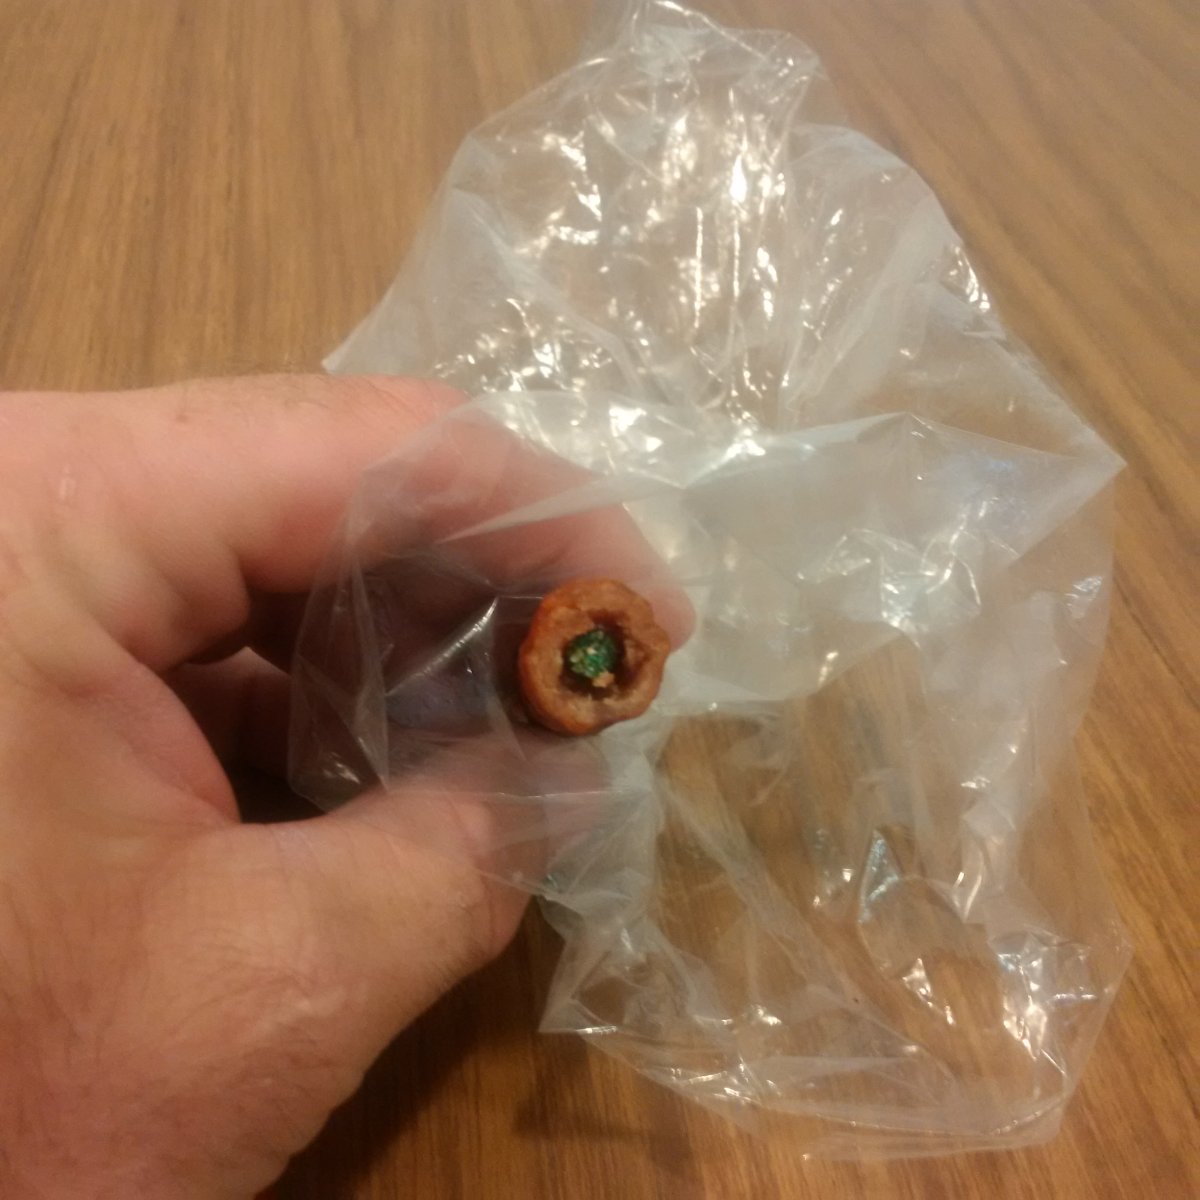 Norfolk County OPP say a hollowed out pepperoni stick filled with what appears to be poison was found on private property on June 5, 2017.